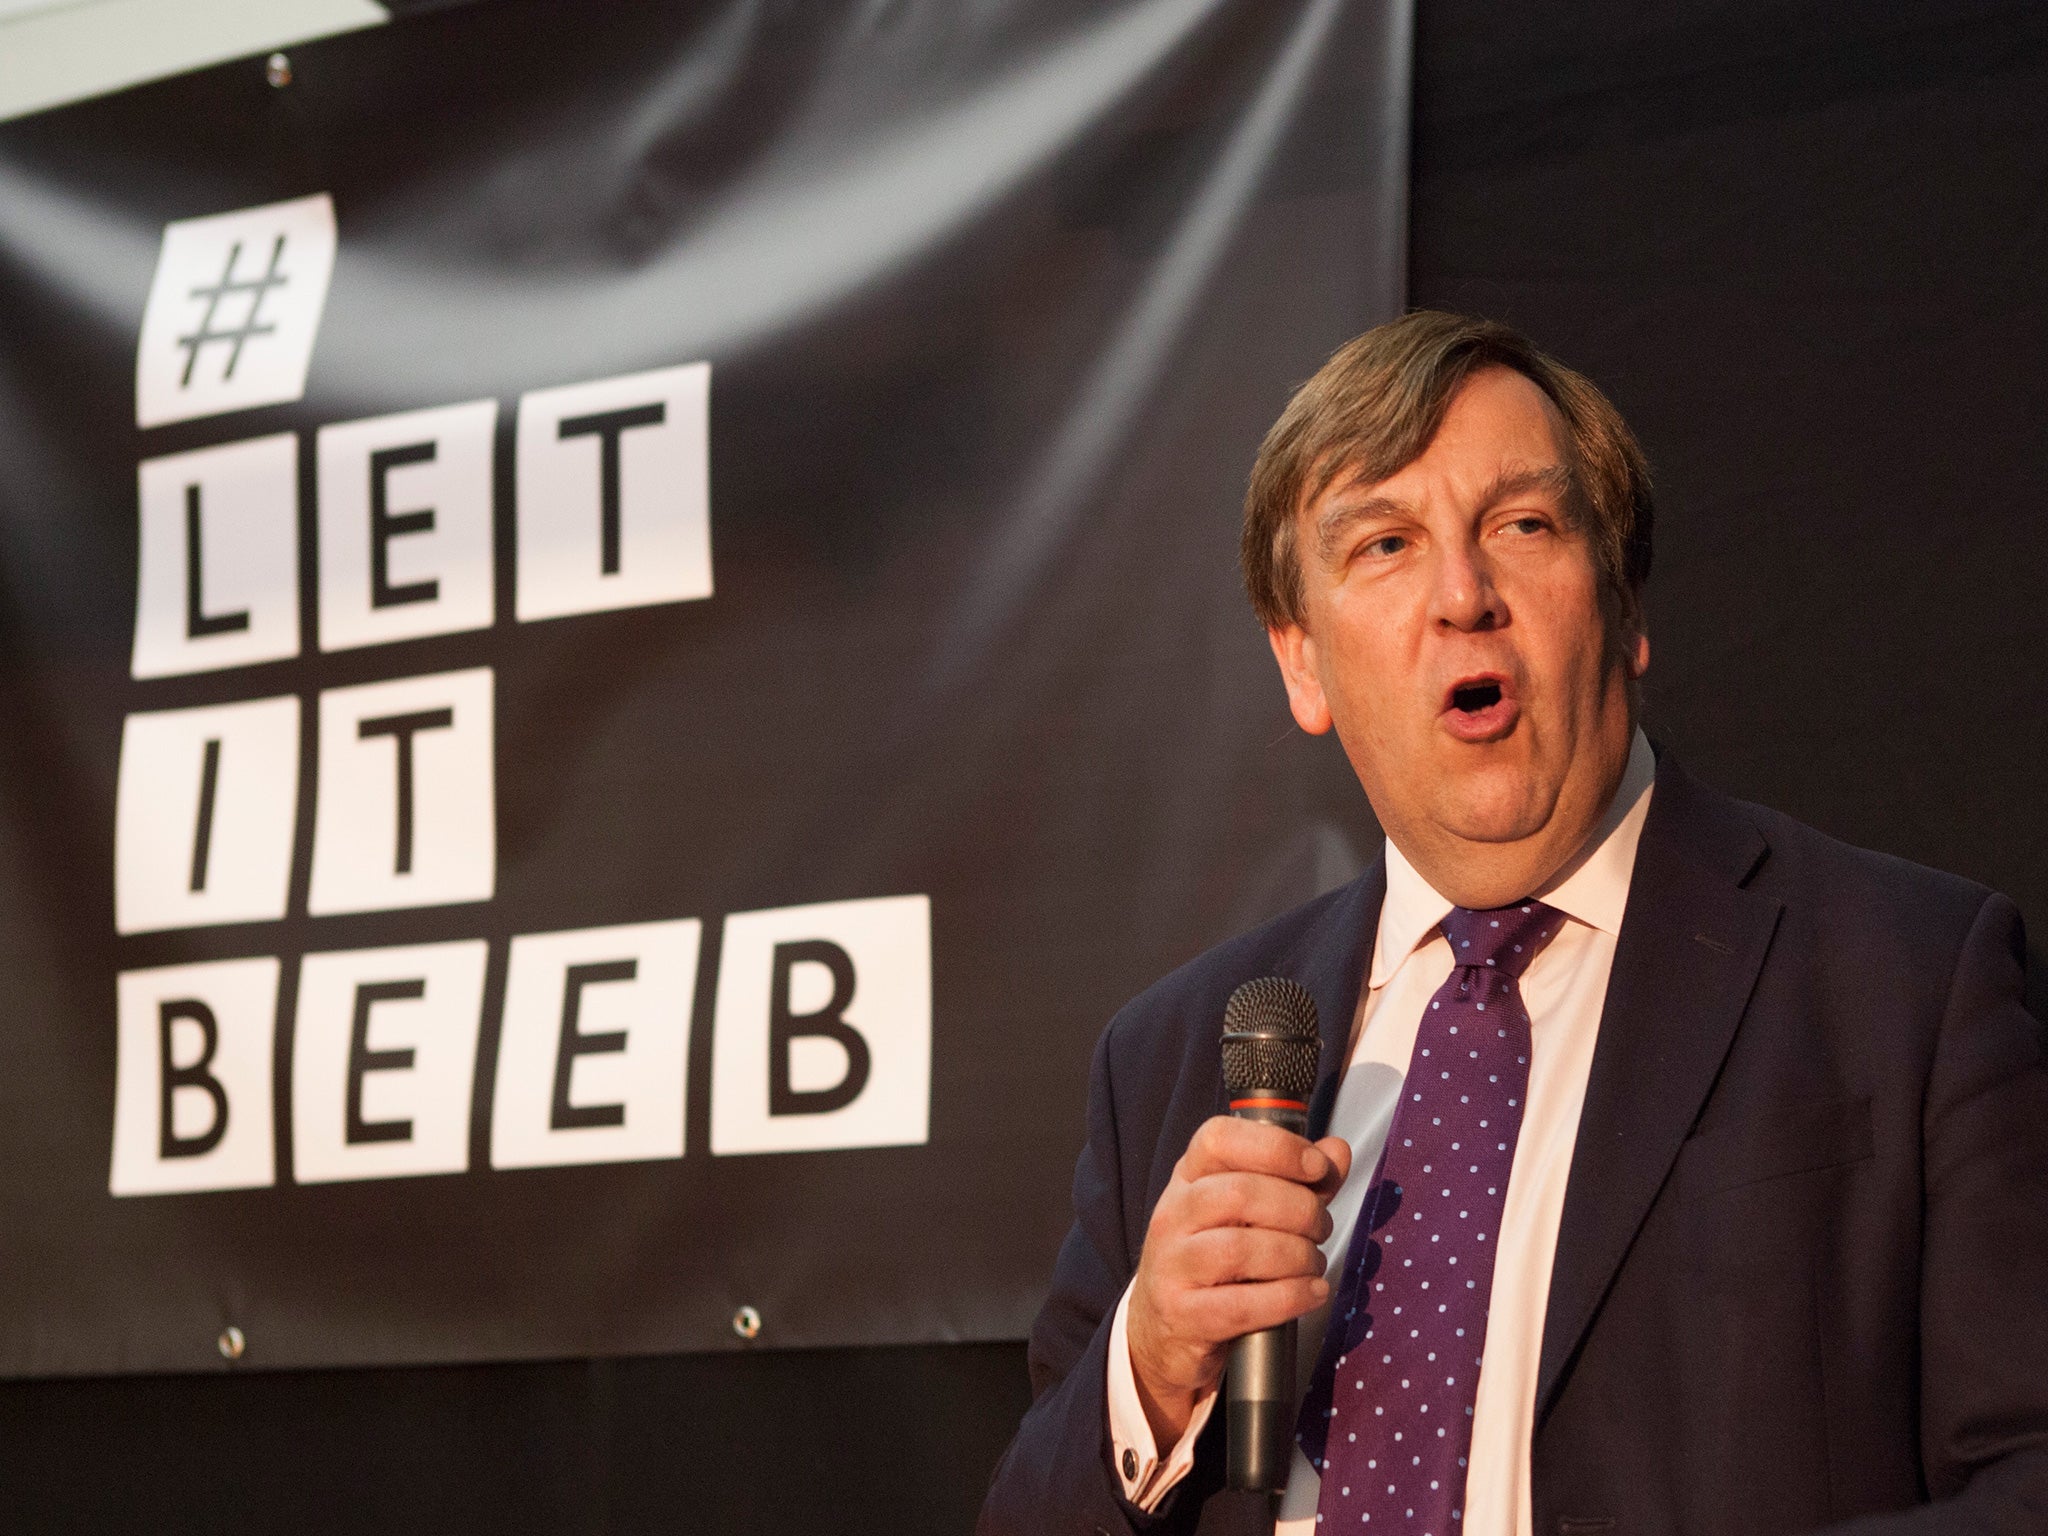 Culture Secretary John Whittingdale speaks at a Parliamentary event organised by the UK Music lobbying body